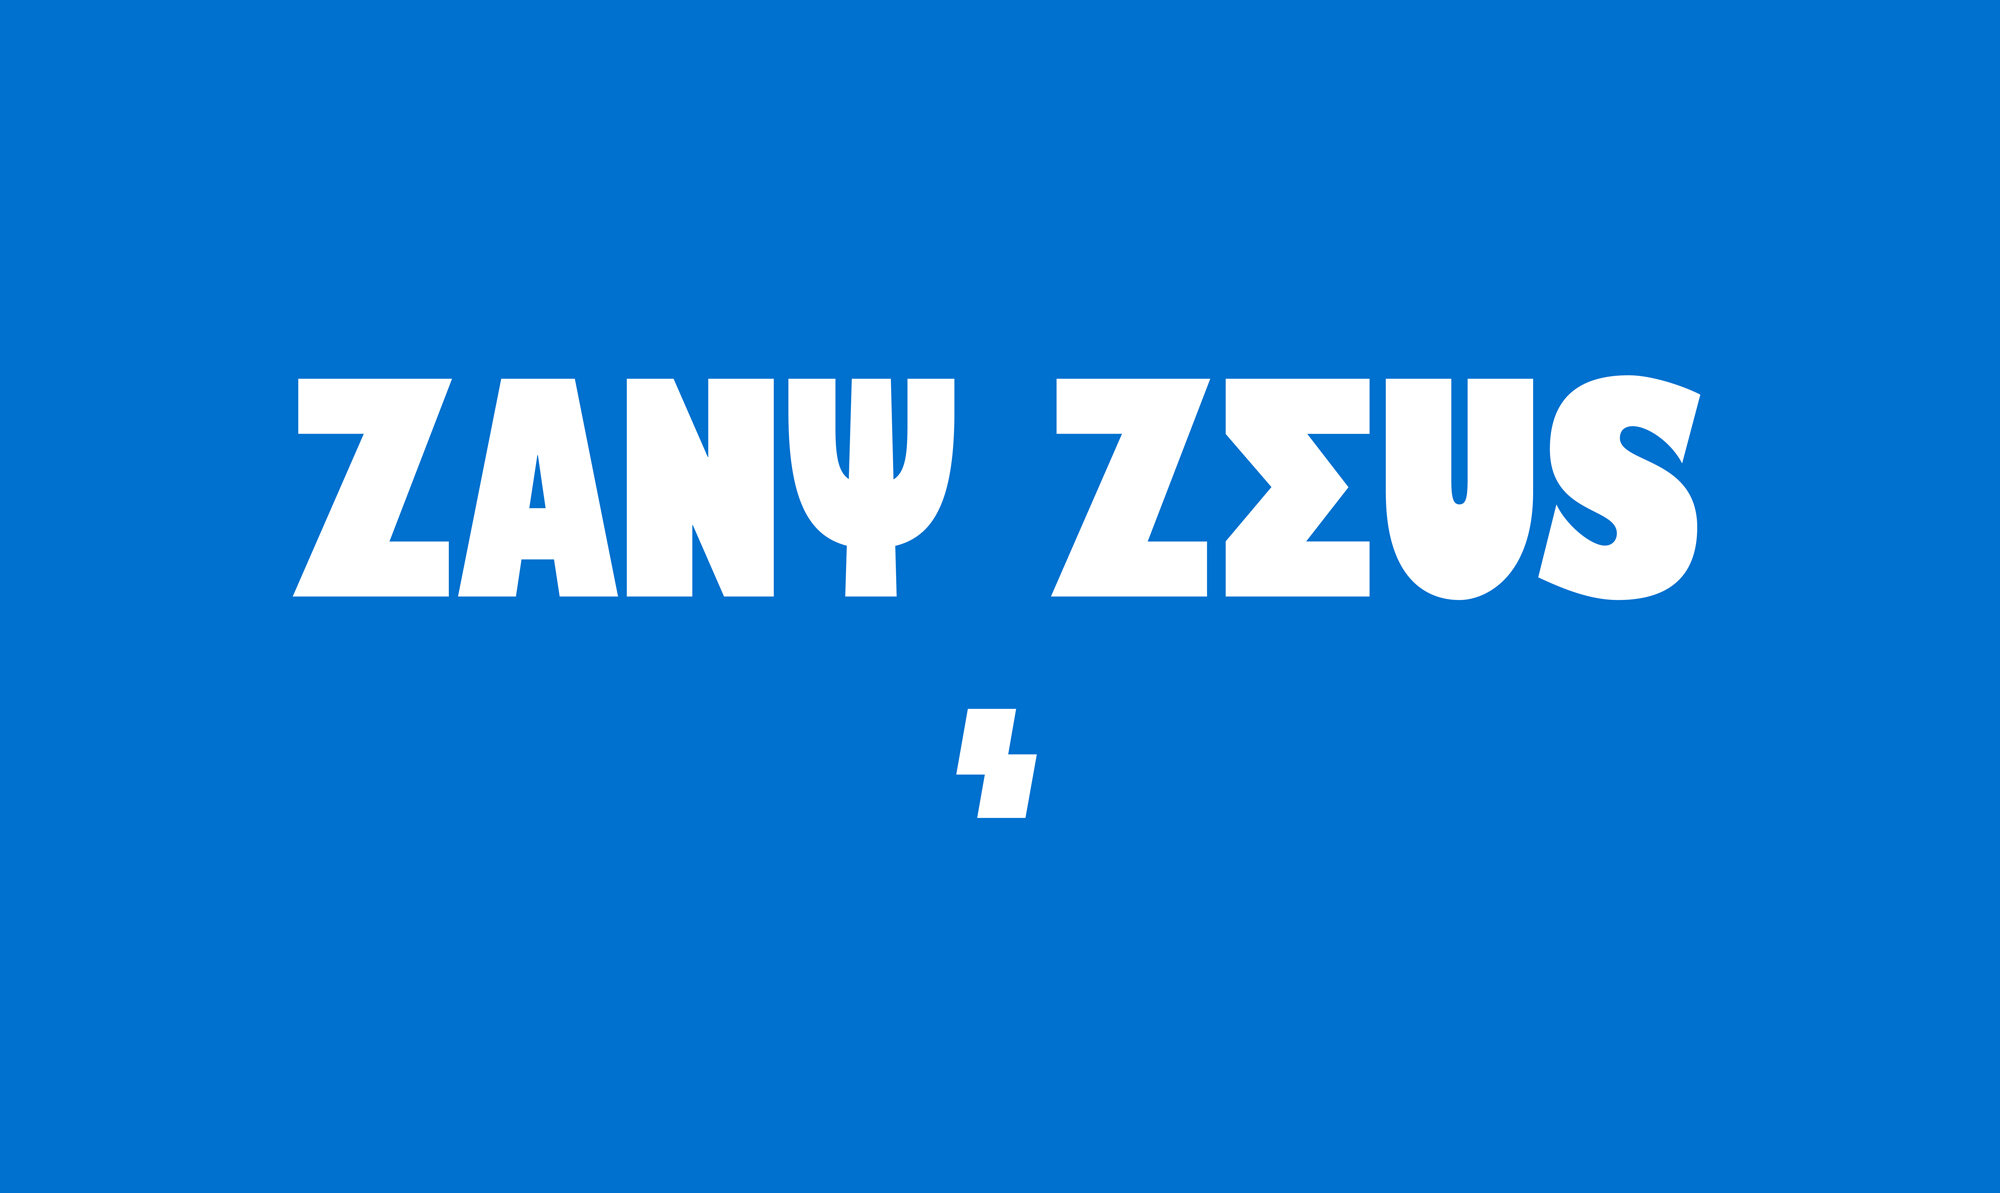  We rebranded Zany Zeus as zealots for food. The design combines an eccentric spirit with crafted visuals. Made with Strategy Creative. 